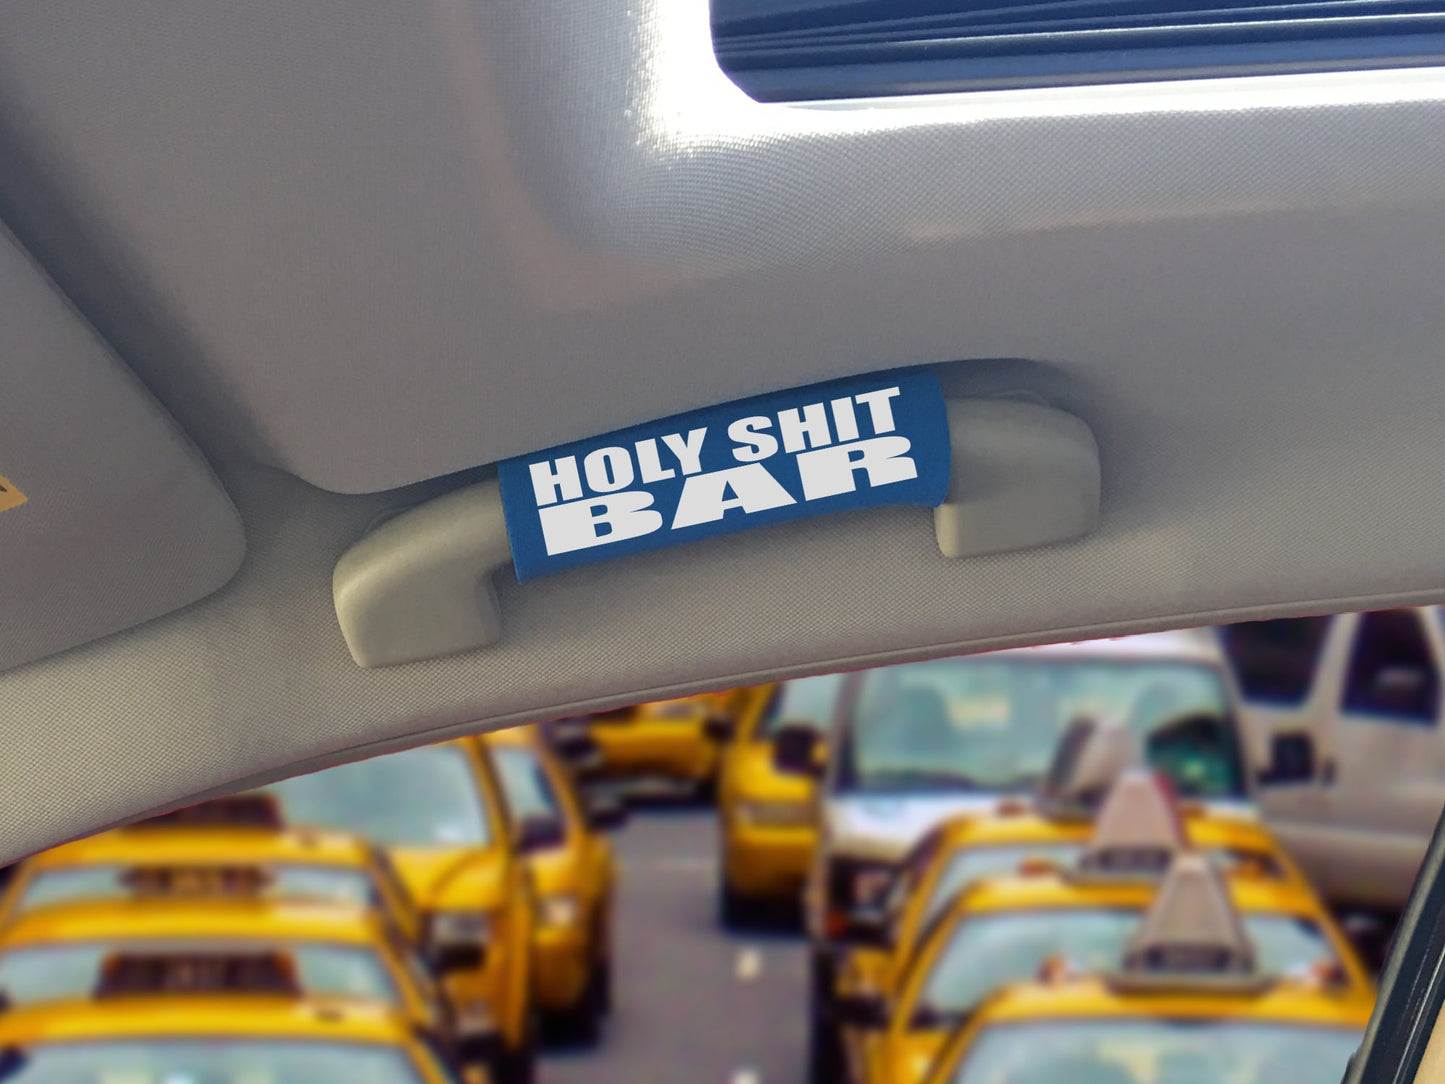 The Holy Shit Bar® (25 Pack)